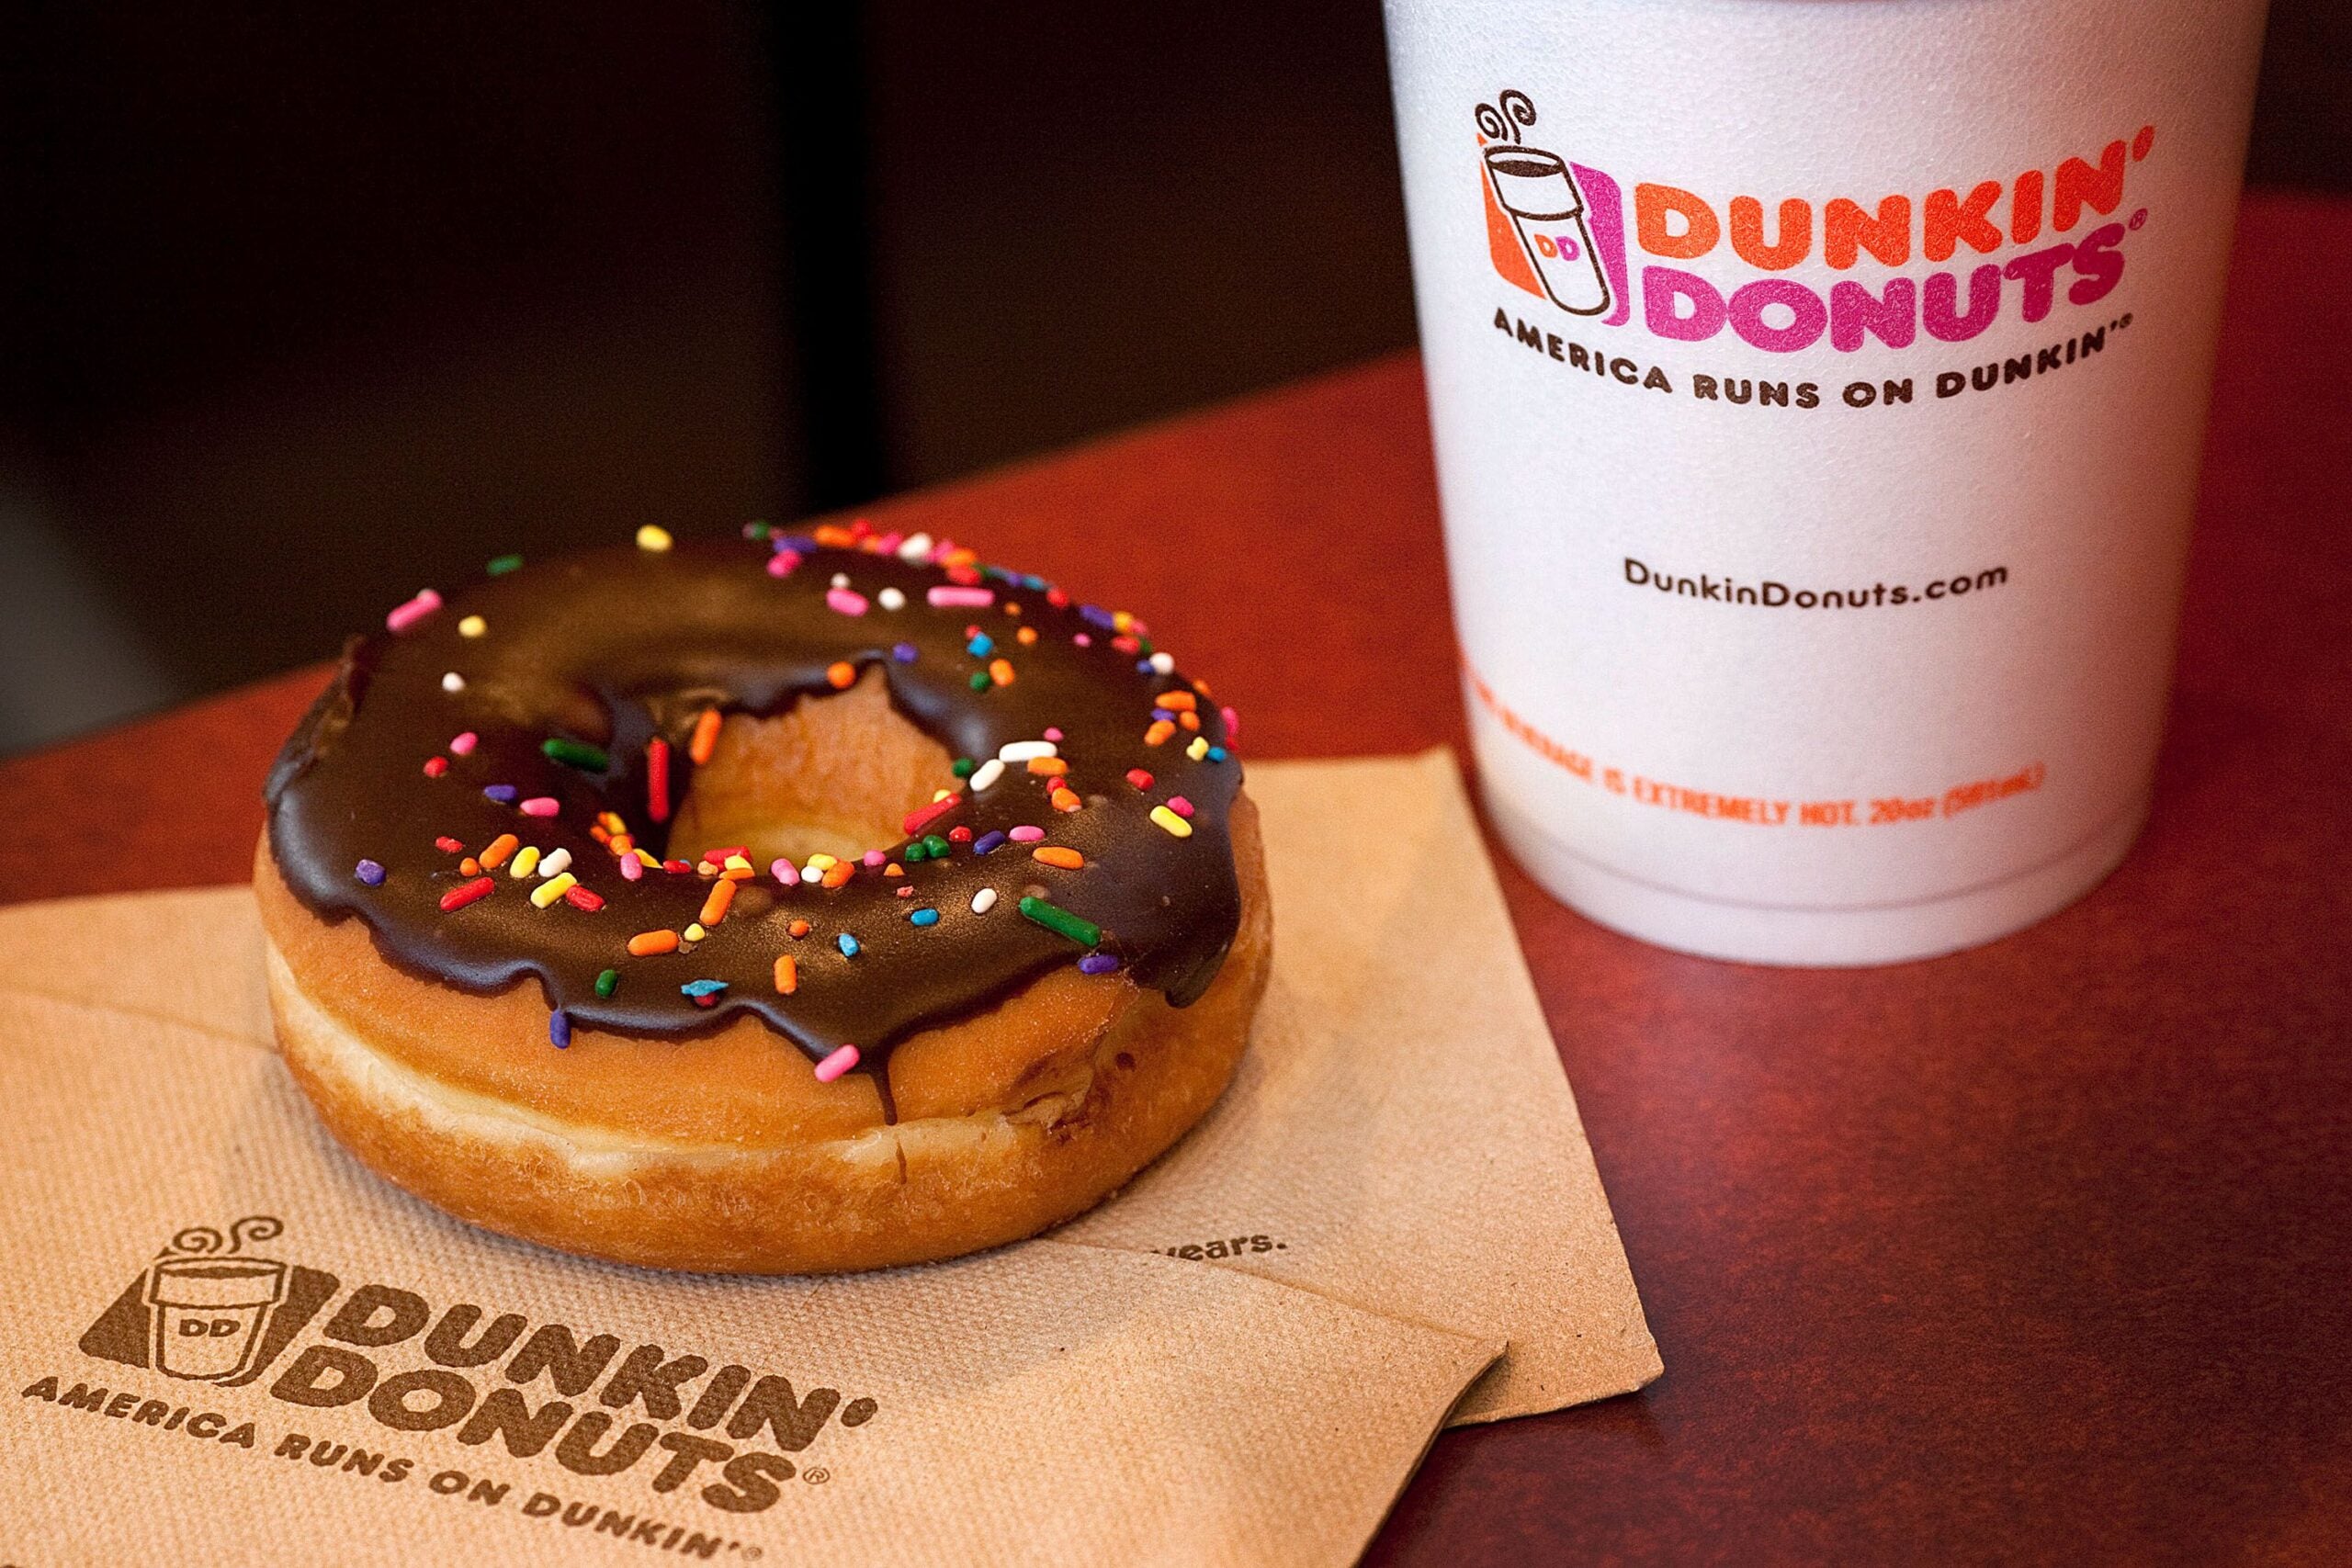 A white to-go coffee cup with a Dunkin' logo sits on a table next to a chocolate-frosted doughnut covered in rainbow sprinkles.